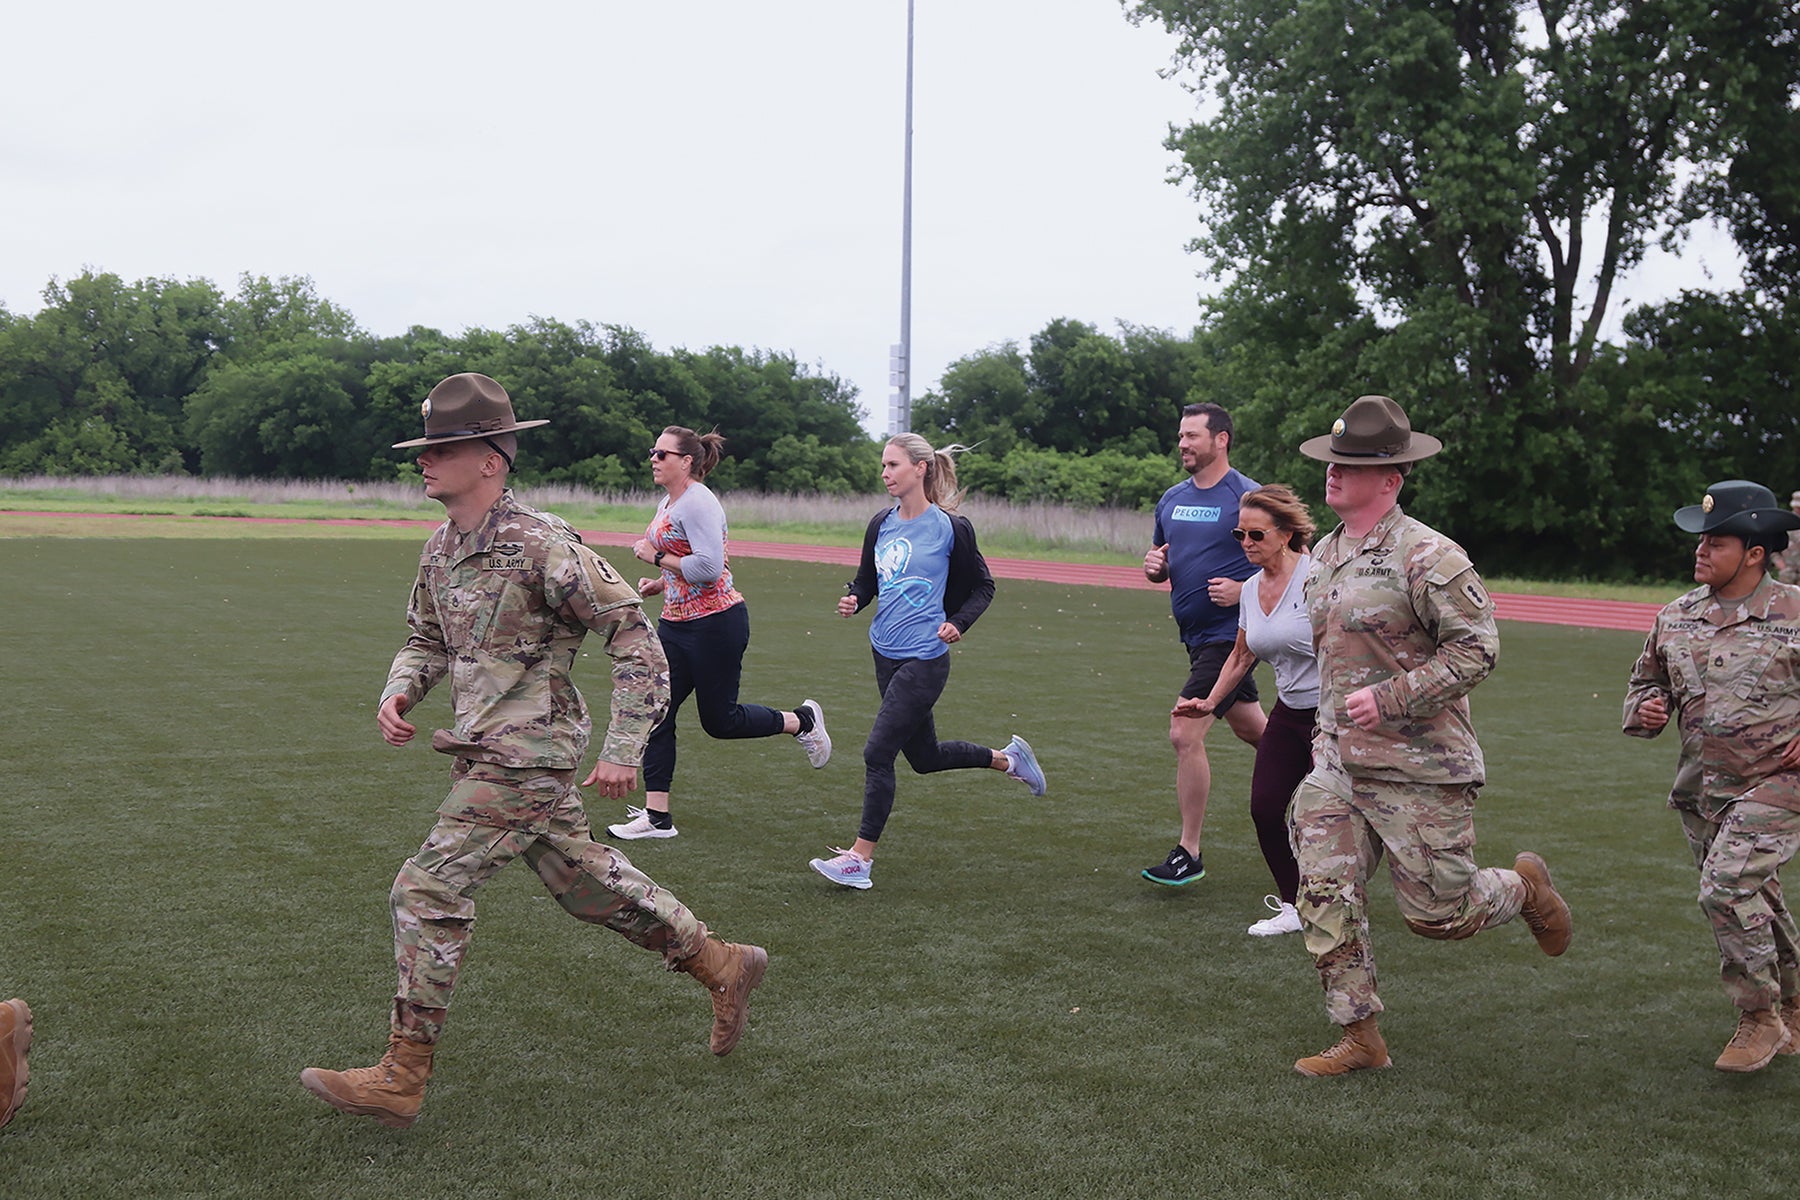 Community members get a taste of what basic training is like at Fort Sill, Oklahoma. (Credit: U.S. Army/Monica Wood)